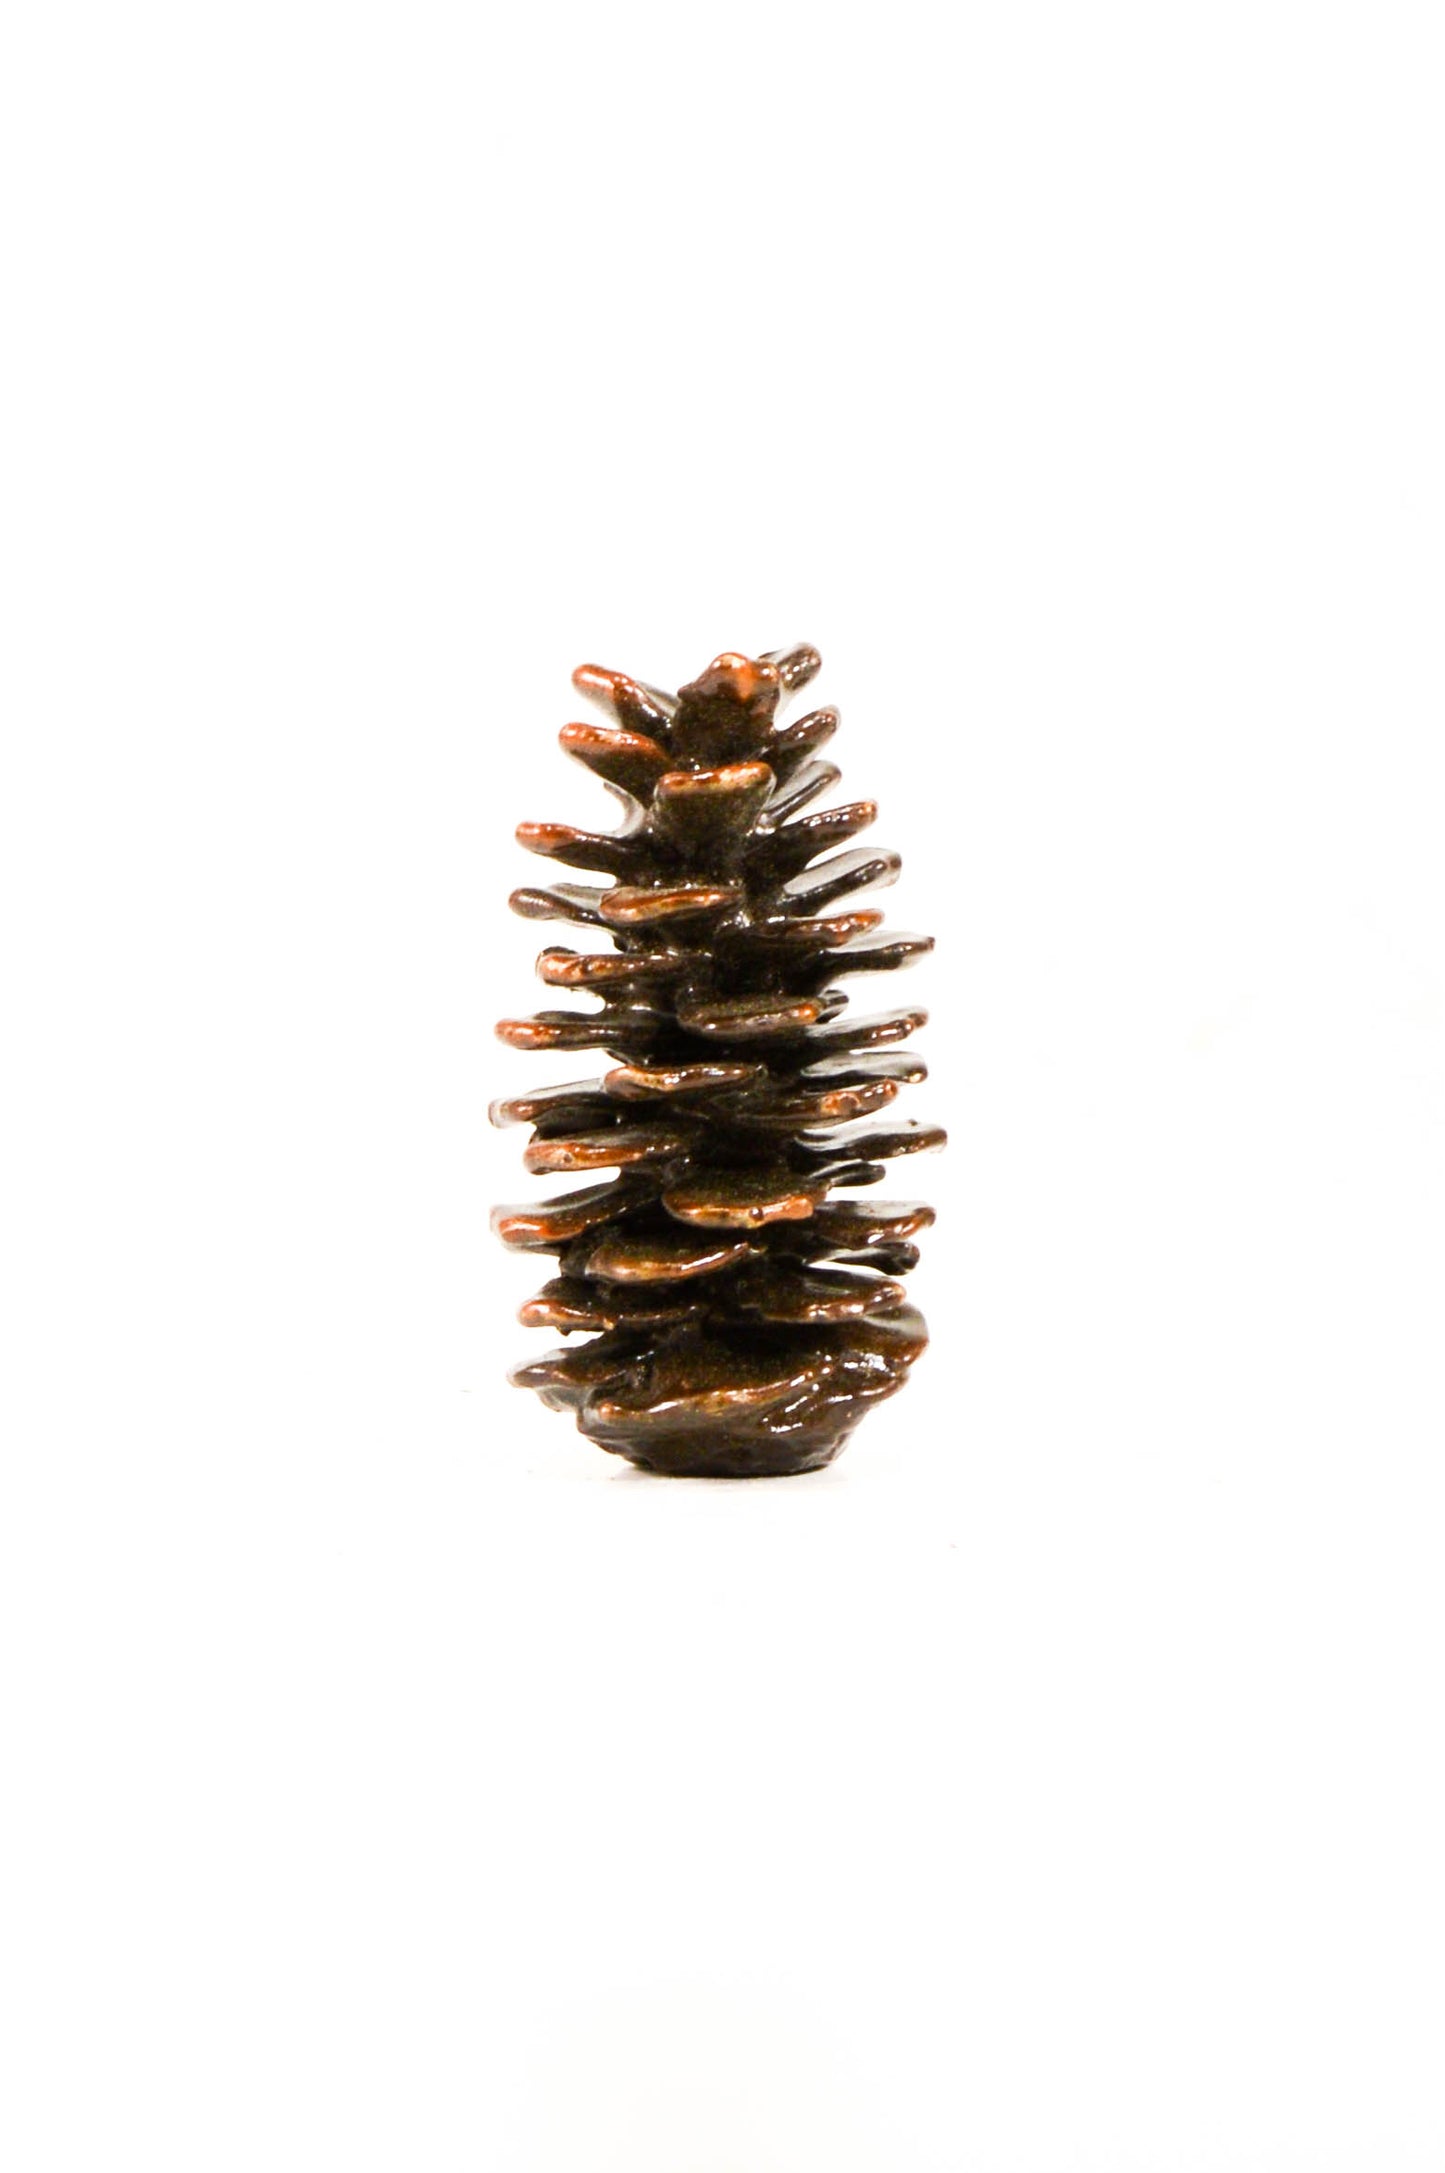 Spruce cone bronze cabinet hardware with patina